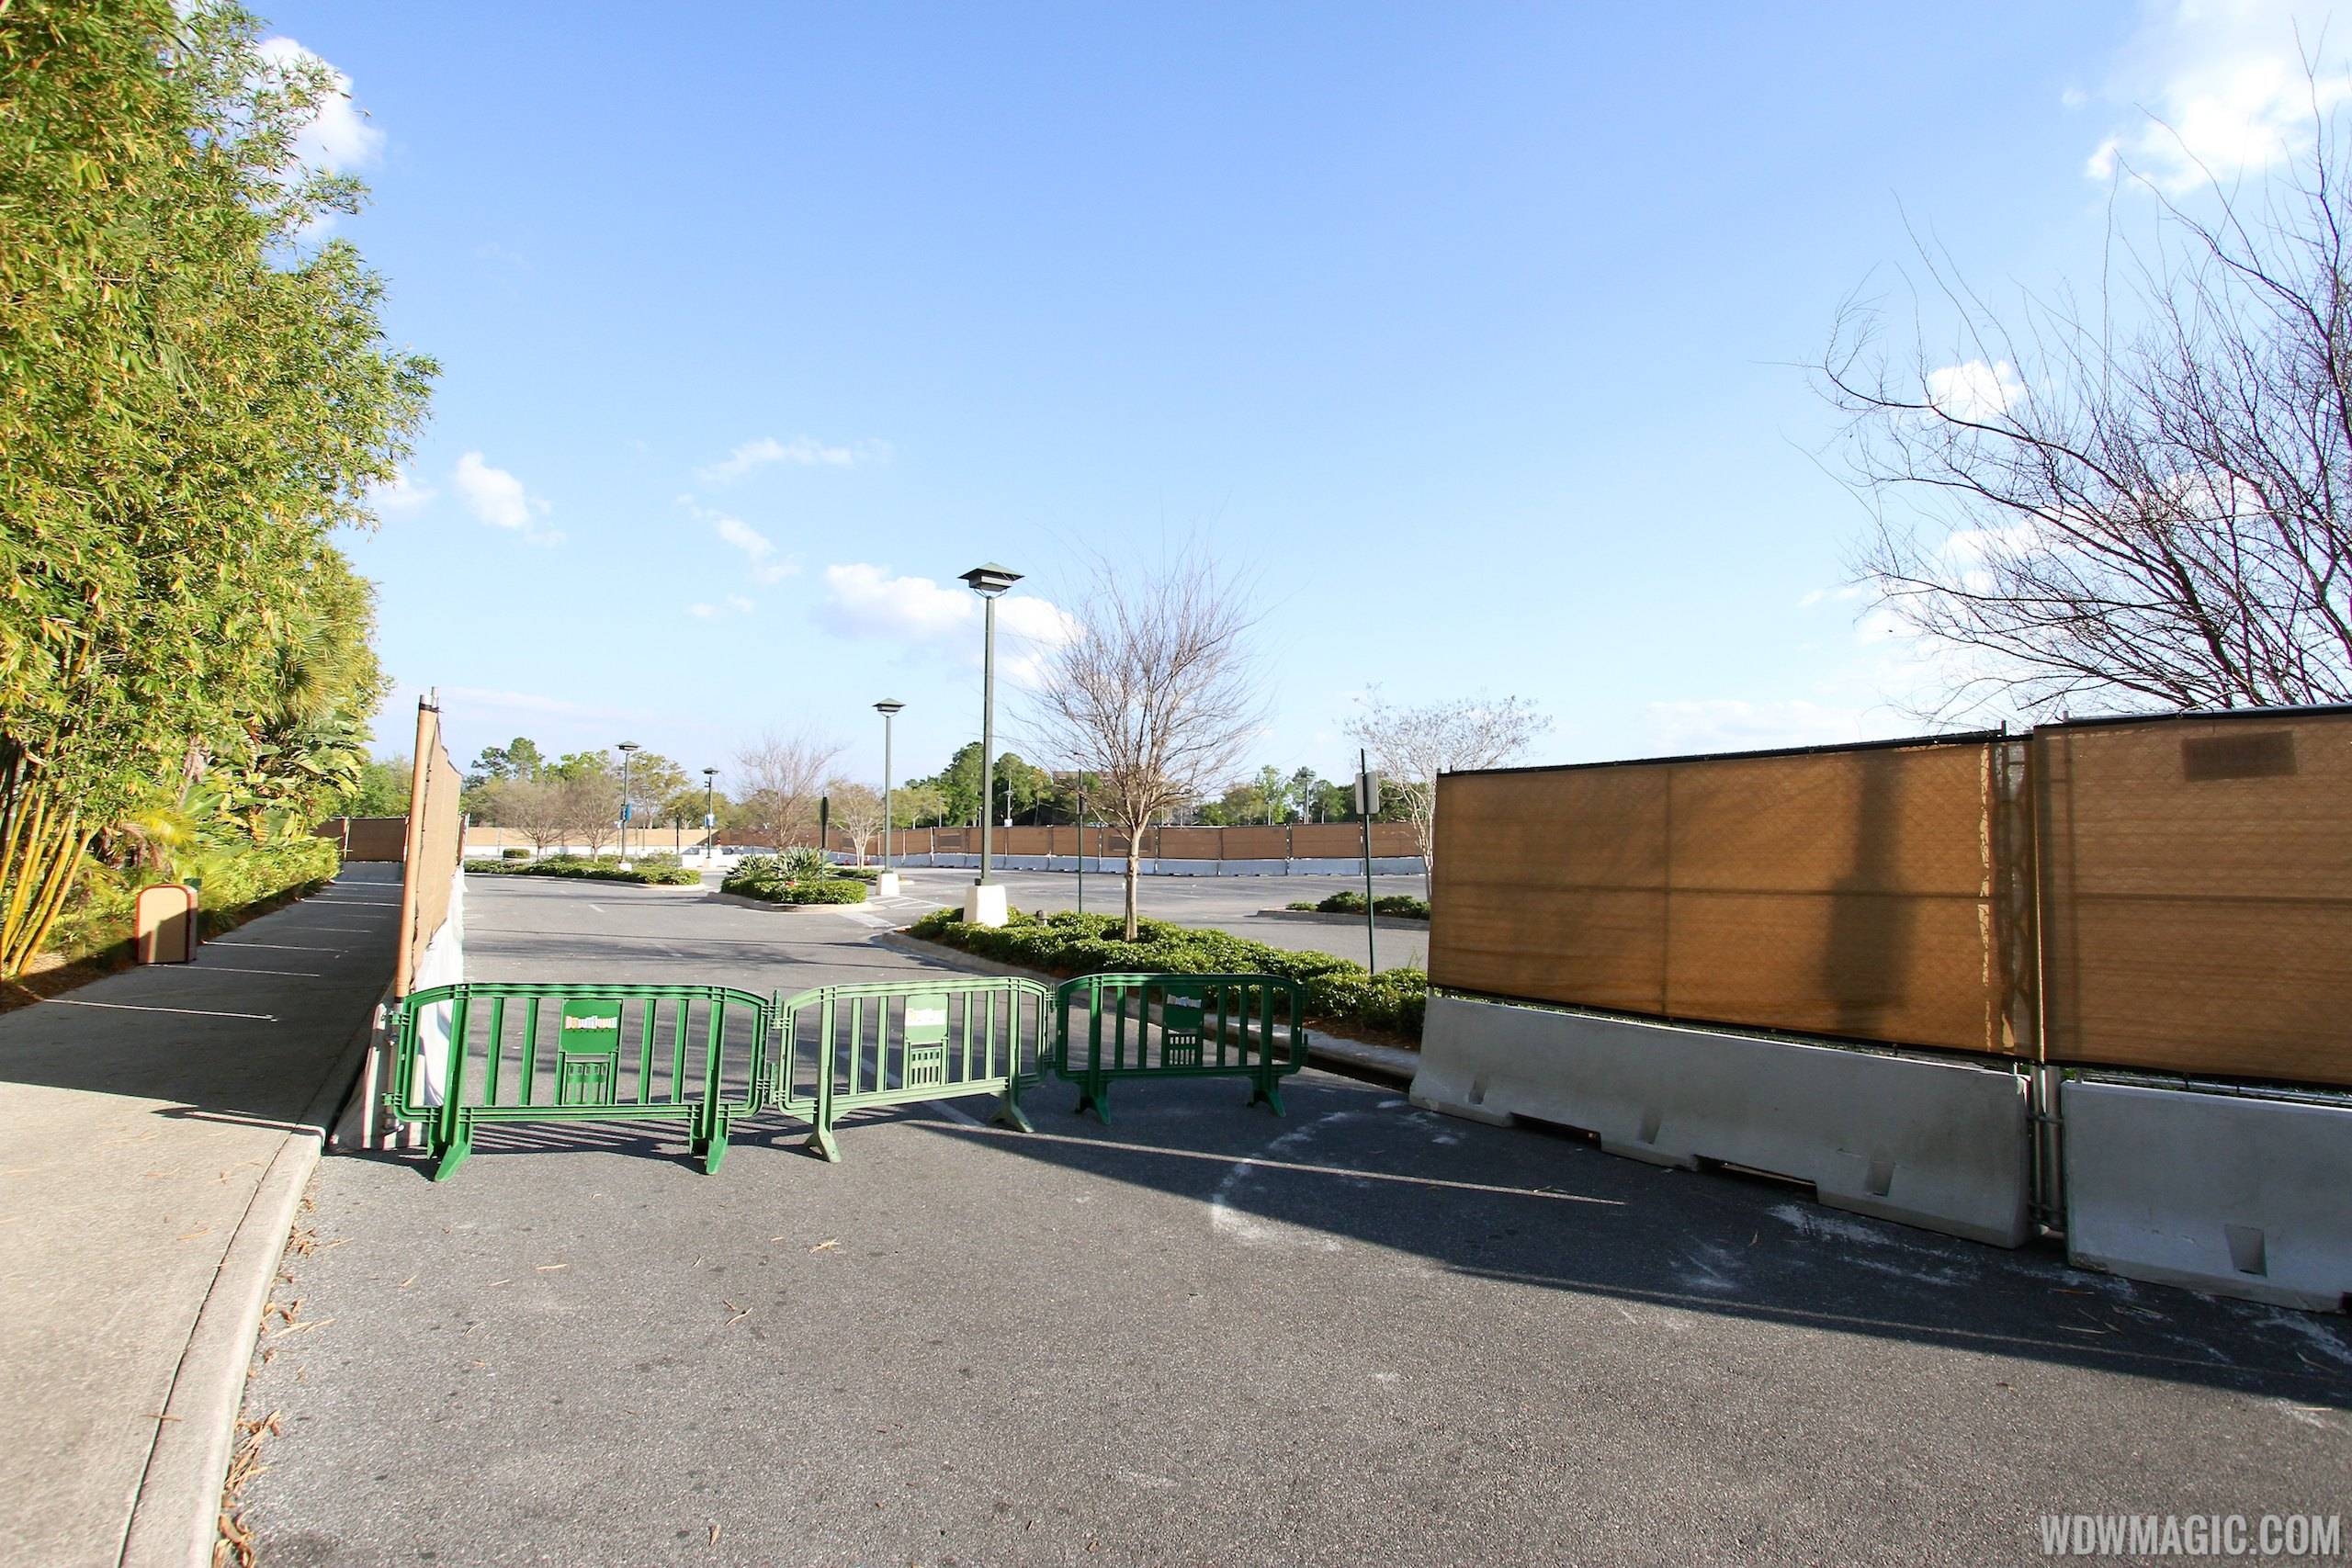 Construction walls up around Pollo Campero and parts of parking lot E, F, G